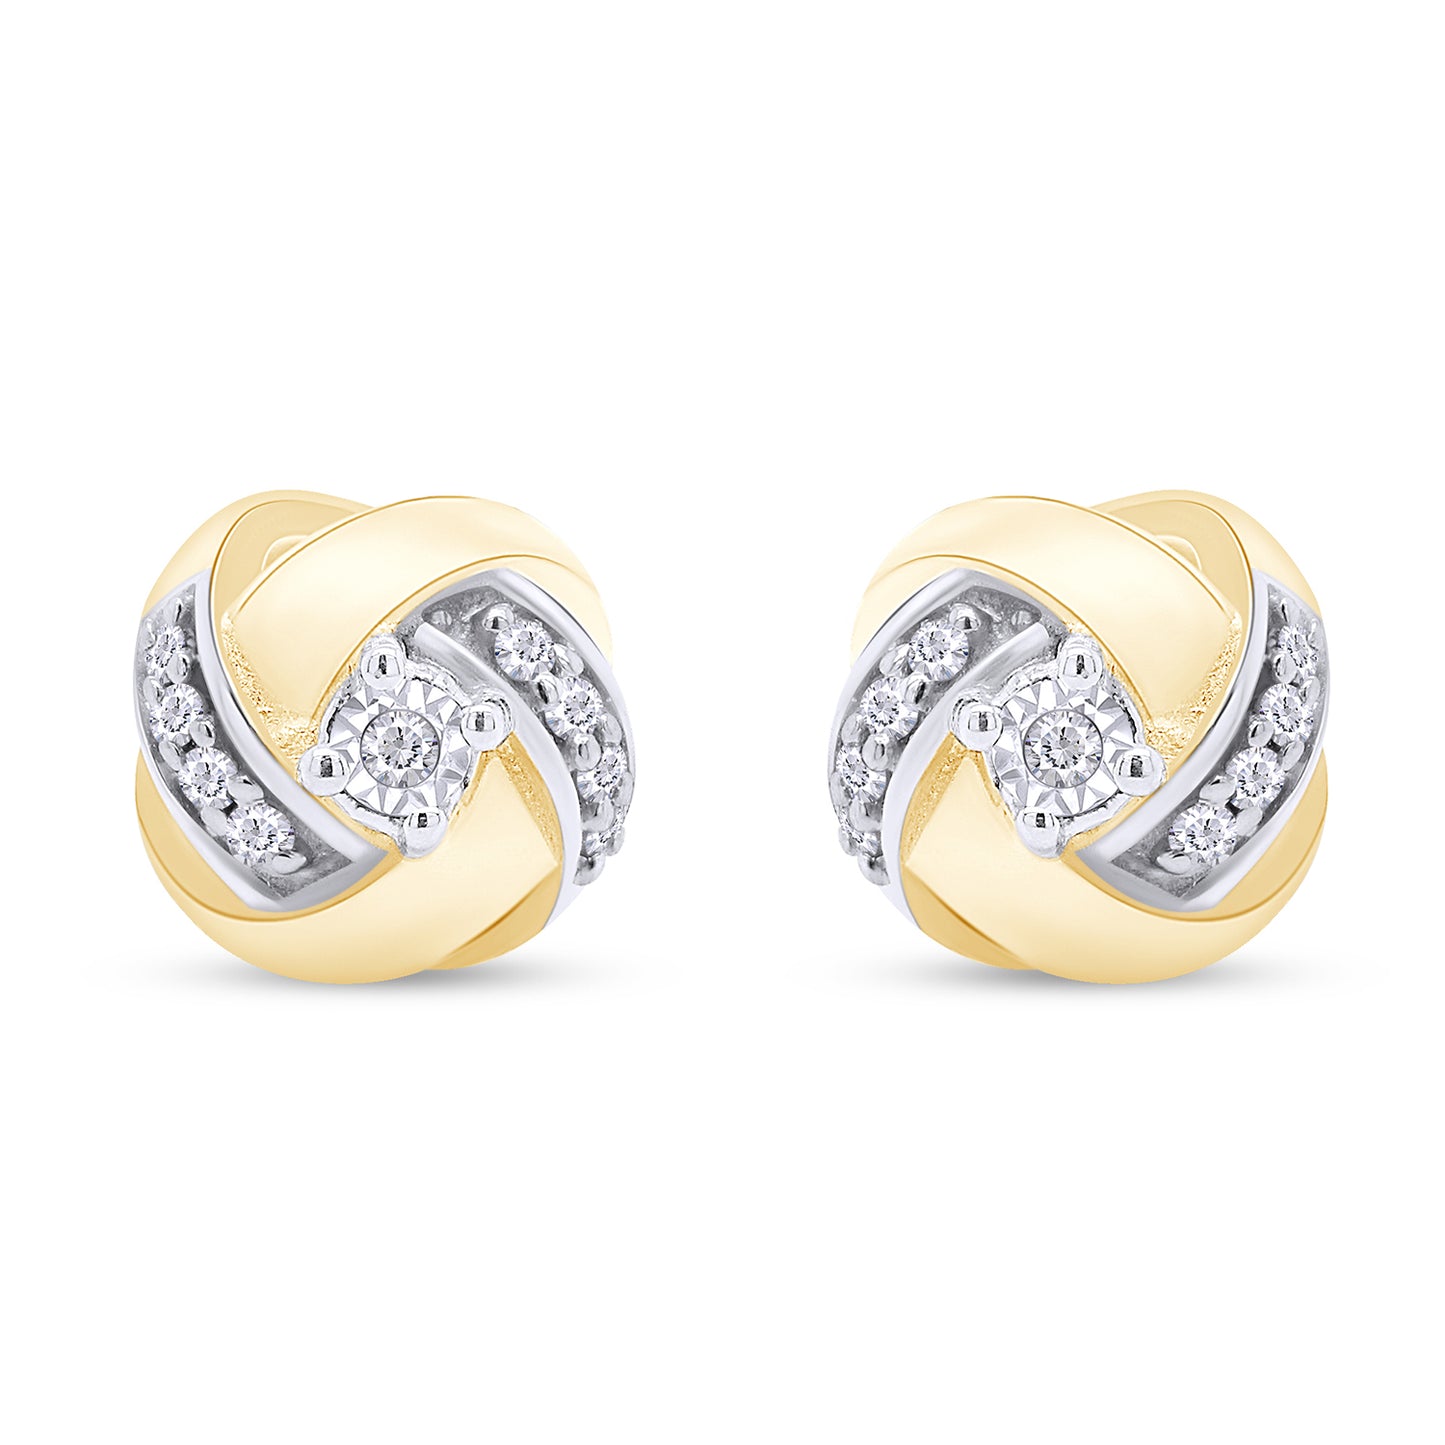 1/8 Carat Round Cut White Natural Diamond Love Knot Stud Earrings In 925 Sterling Silver